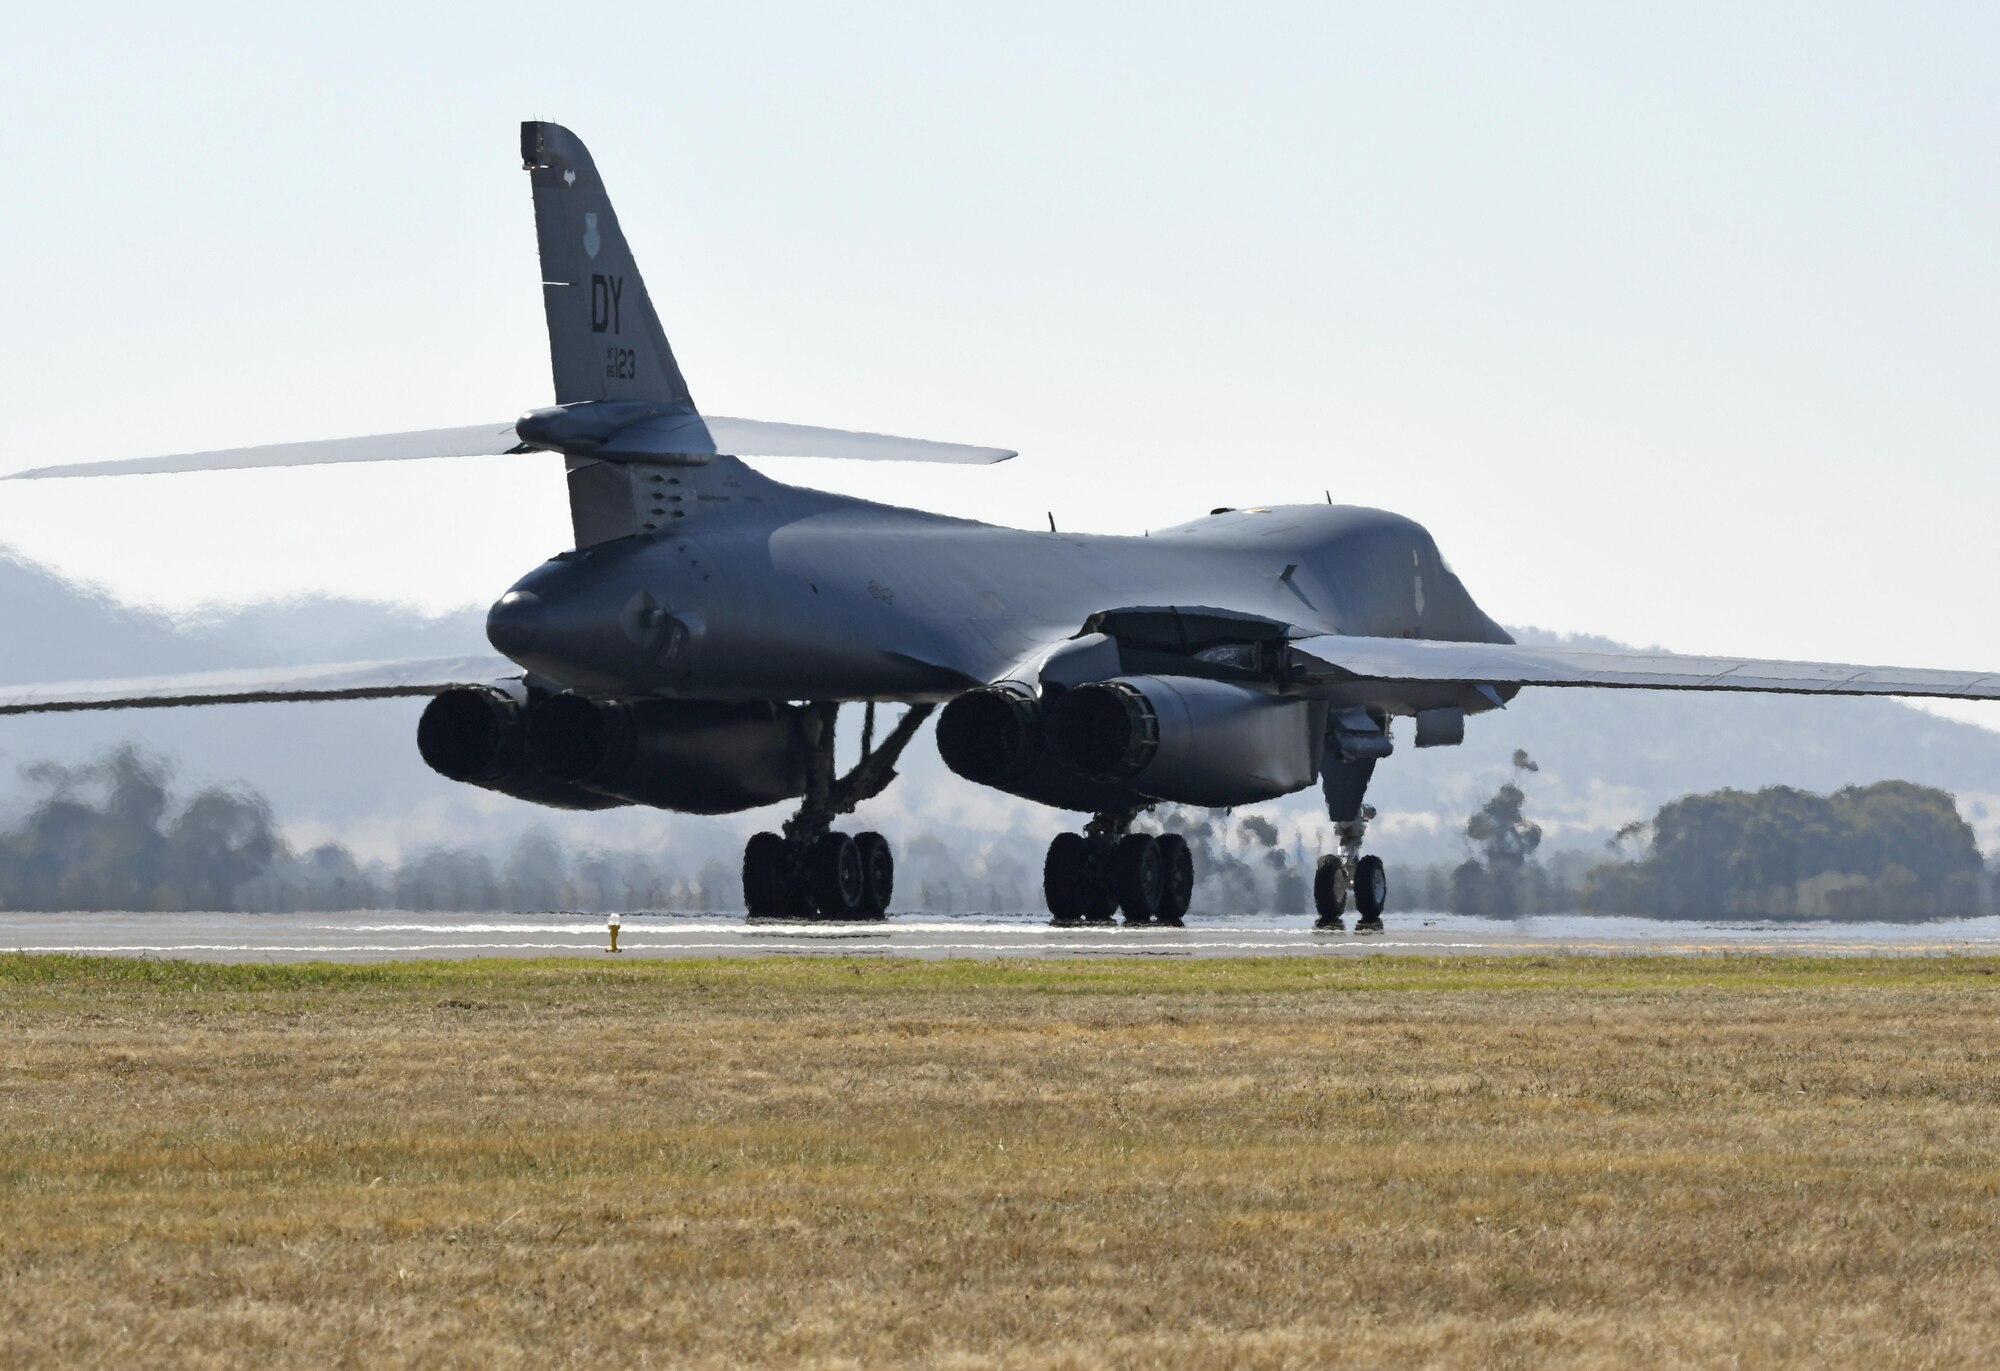 A U.S. Air Force B-1B Lancer bomber aircraft lands at Avalon Airport, Geelong, Australia, March 1, 2017. The B-1B is participating in the Australian International Airshow and Aerospace & Defence Exposition (AVALON), the largest, most comprehensive aerial event of its kind in the Southern Hemisphere. While at AVALON, the B-1B will be on static display for airshow participants. This is the first time B-1s have landed in Australia while deployed in support of U.S. Pacific Command’s Continuous Bomber Presence mission. The U.S. conducts CBP operations routinely by forward deploying bombers into the region as a deterrence capability supporting security and allies and partners in the Indo-Asia-Pacific. Bombers and aircrew commonly participate in combined exercises and operations during CBP deployments. AVALON 2017 provided an ideal forum for the U.S. to showcase the B-1B’s capabilities to our allies, partners and citizens of the Pacific. (U.S. Air Force photo by Master Sgt. John Gordinier)